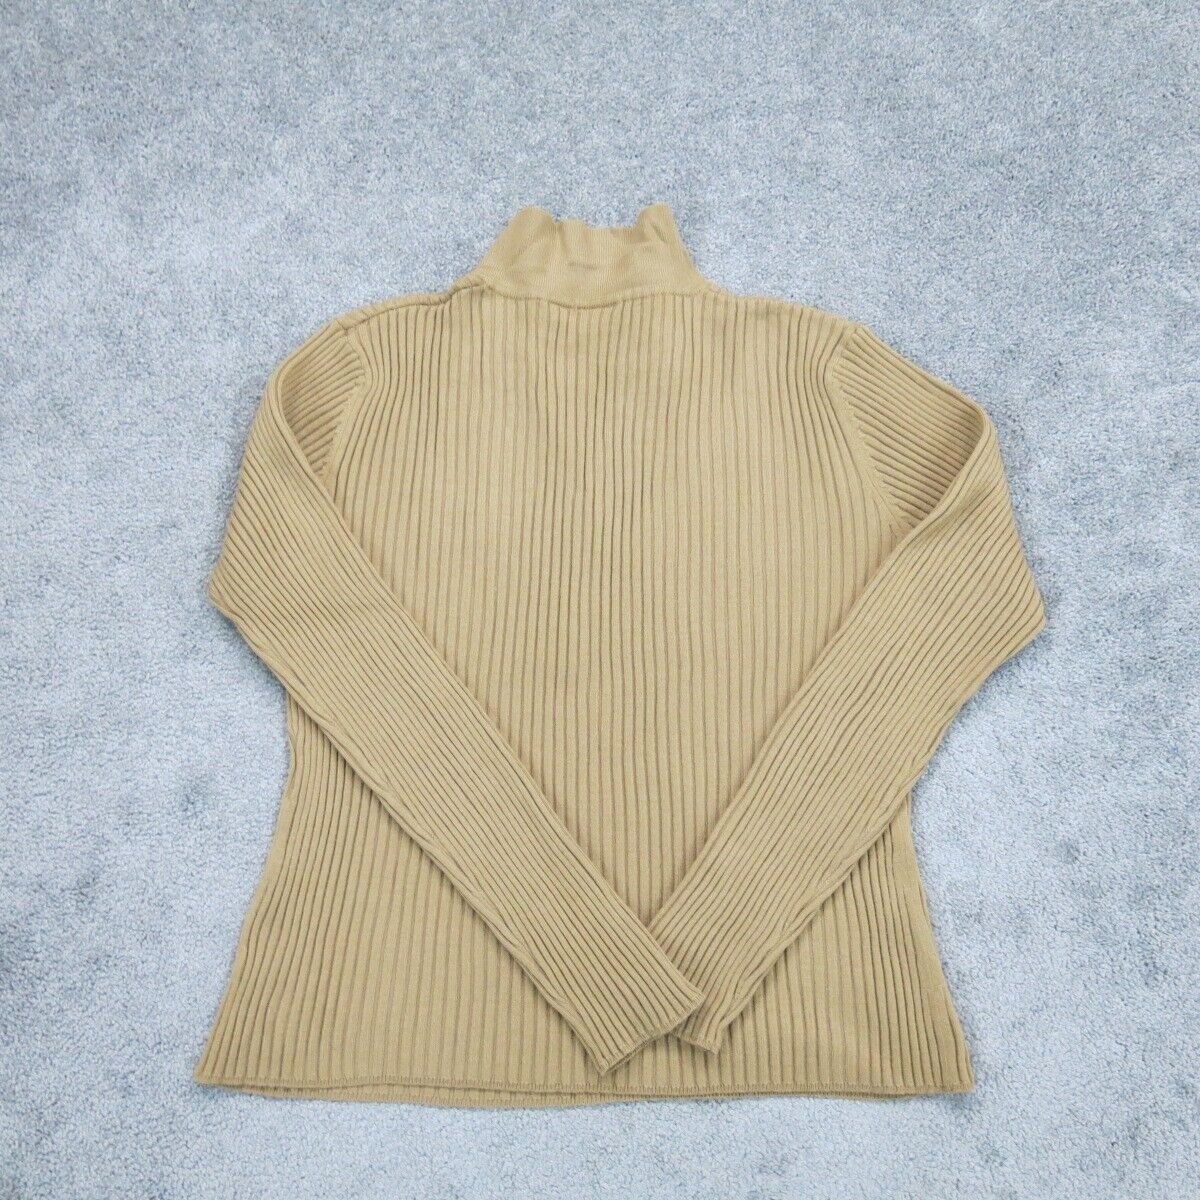 Mossimo Mens Sweater Knitted Long Sleeve Collared Neck Light Brown Size X Large